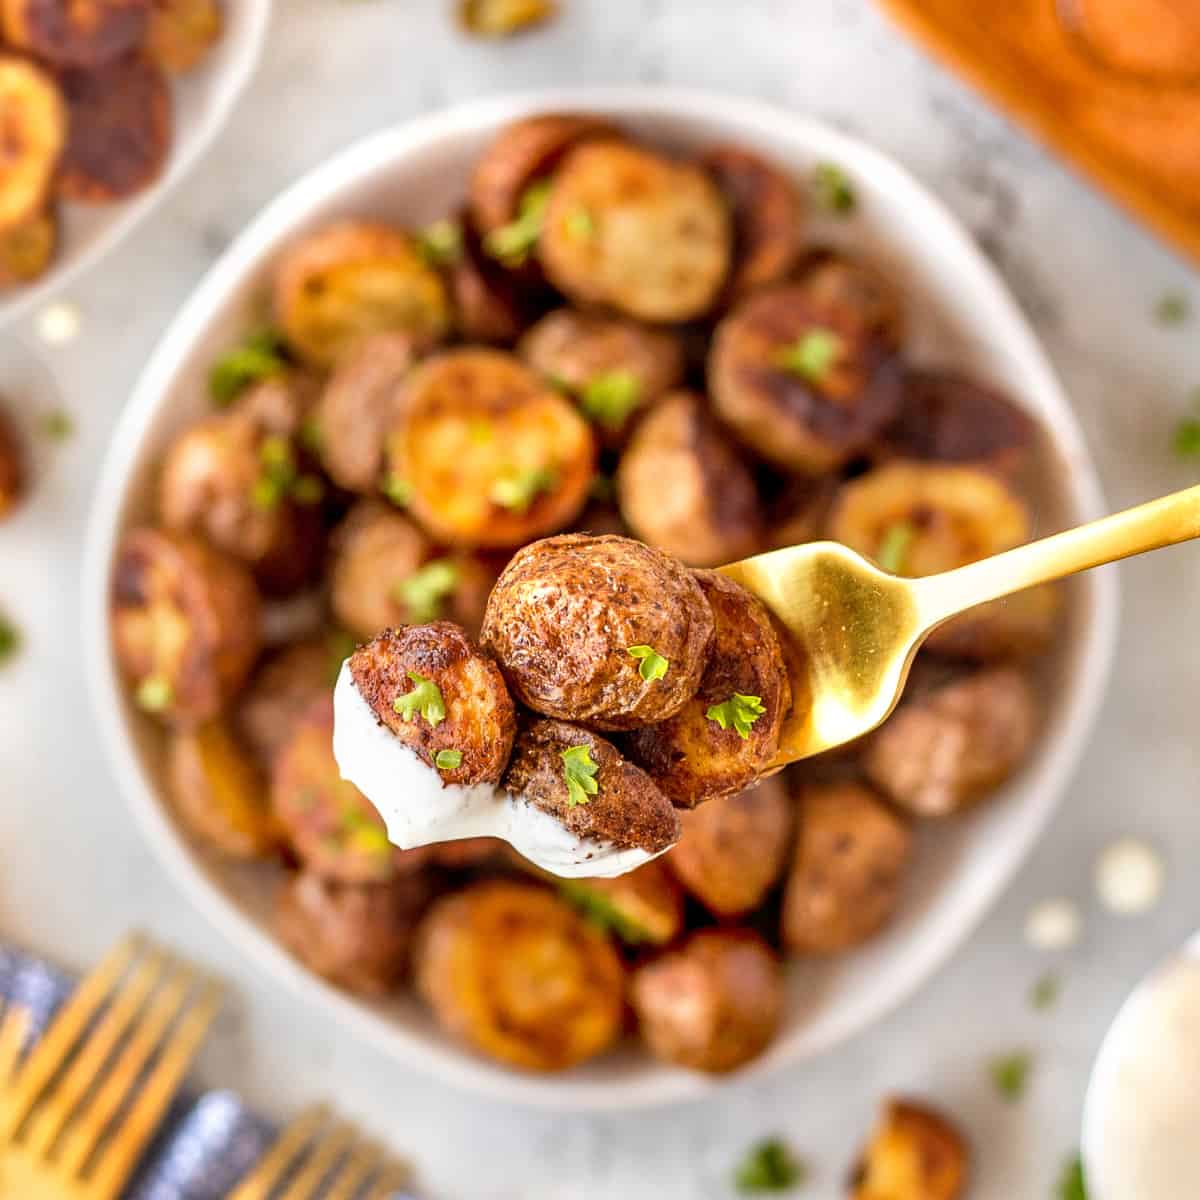 Overhead shot of potatoes on a fork dipped in dressing